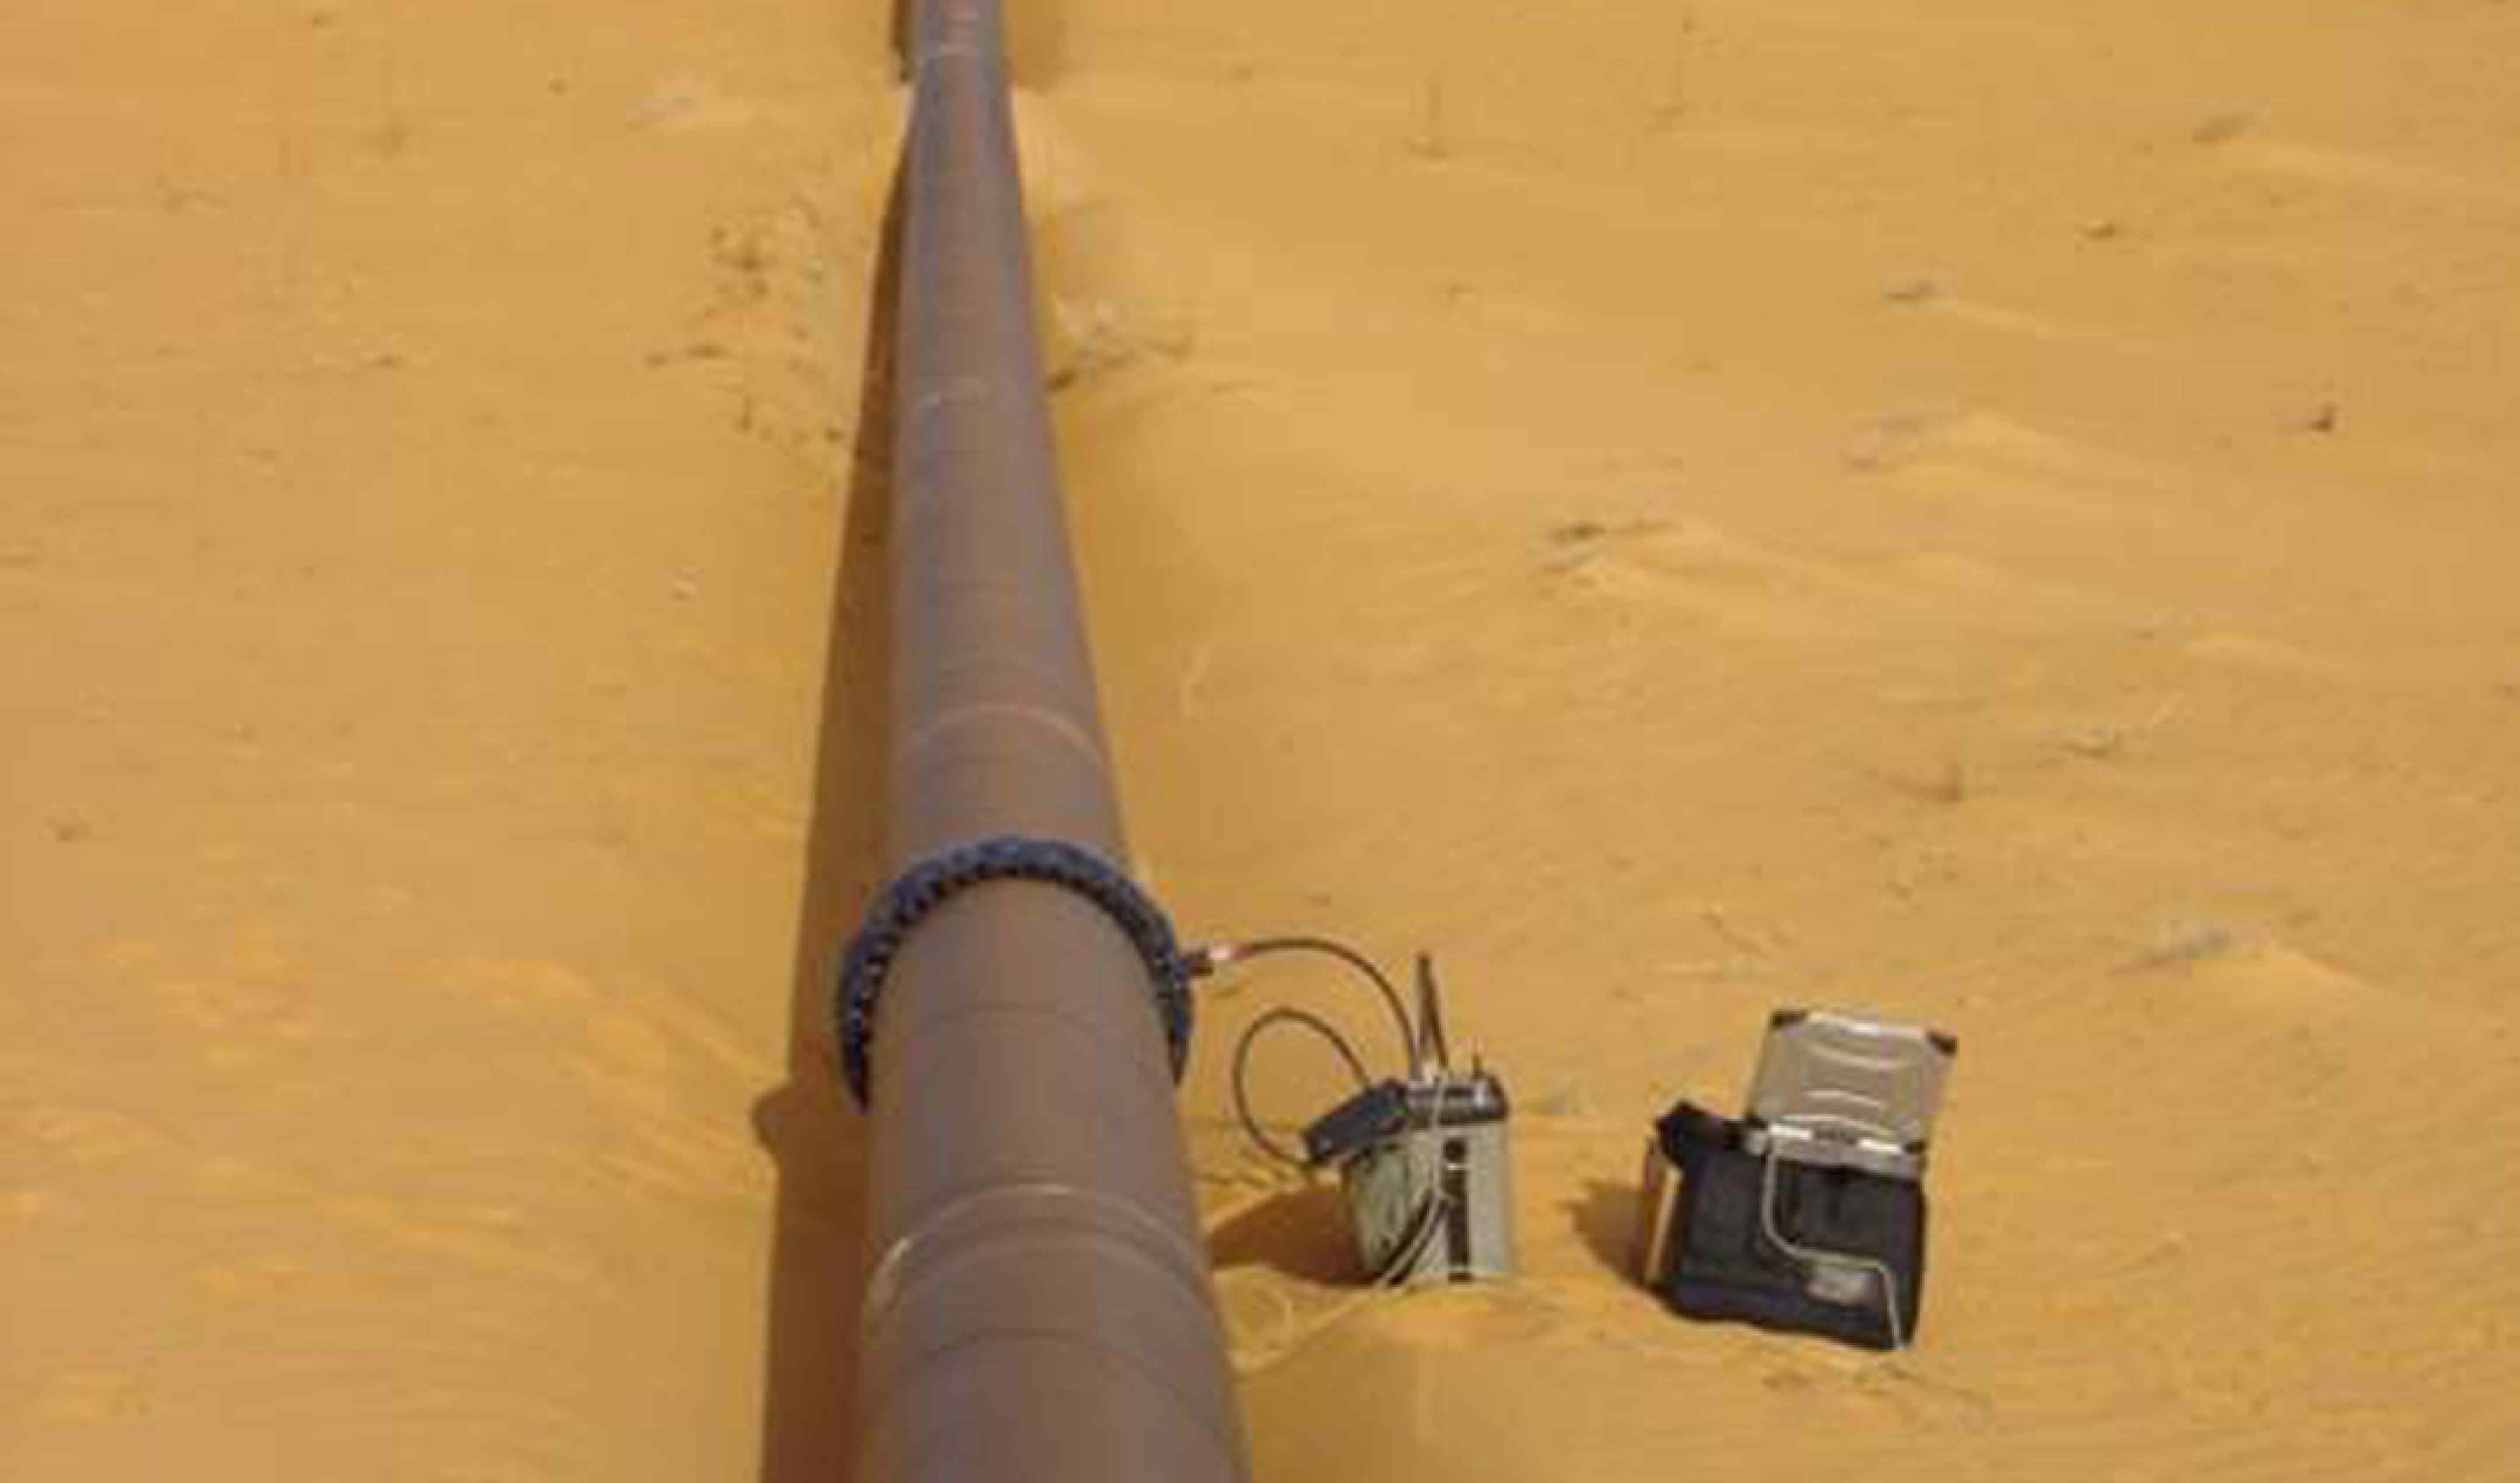 A pipe linked to a sensor array and test equipment in the desert